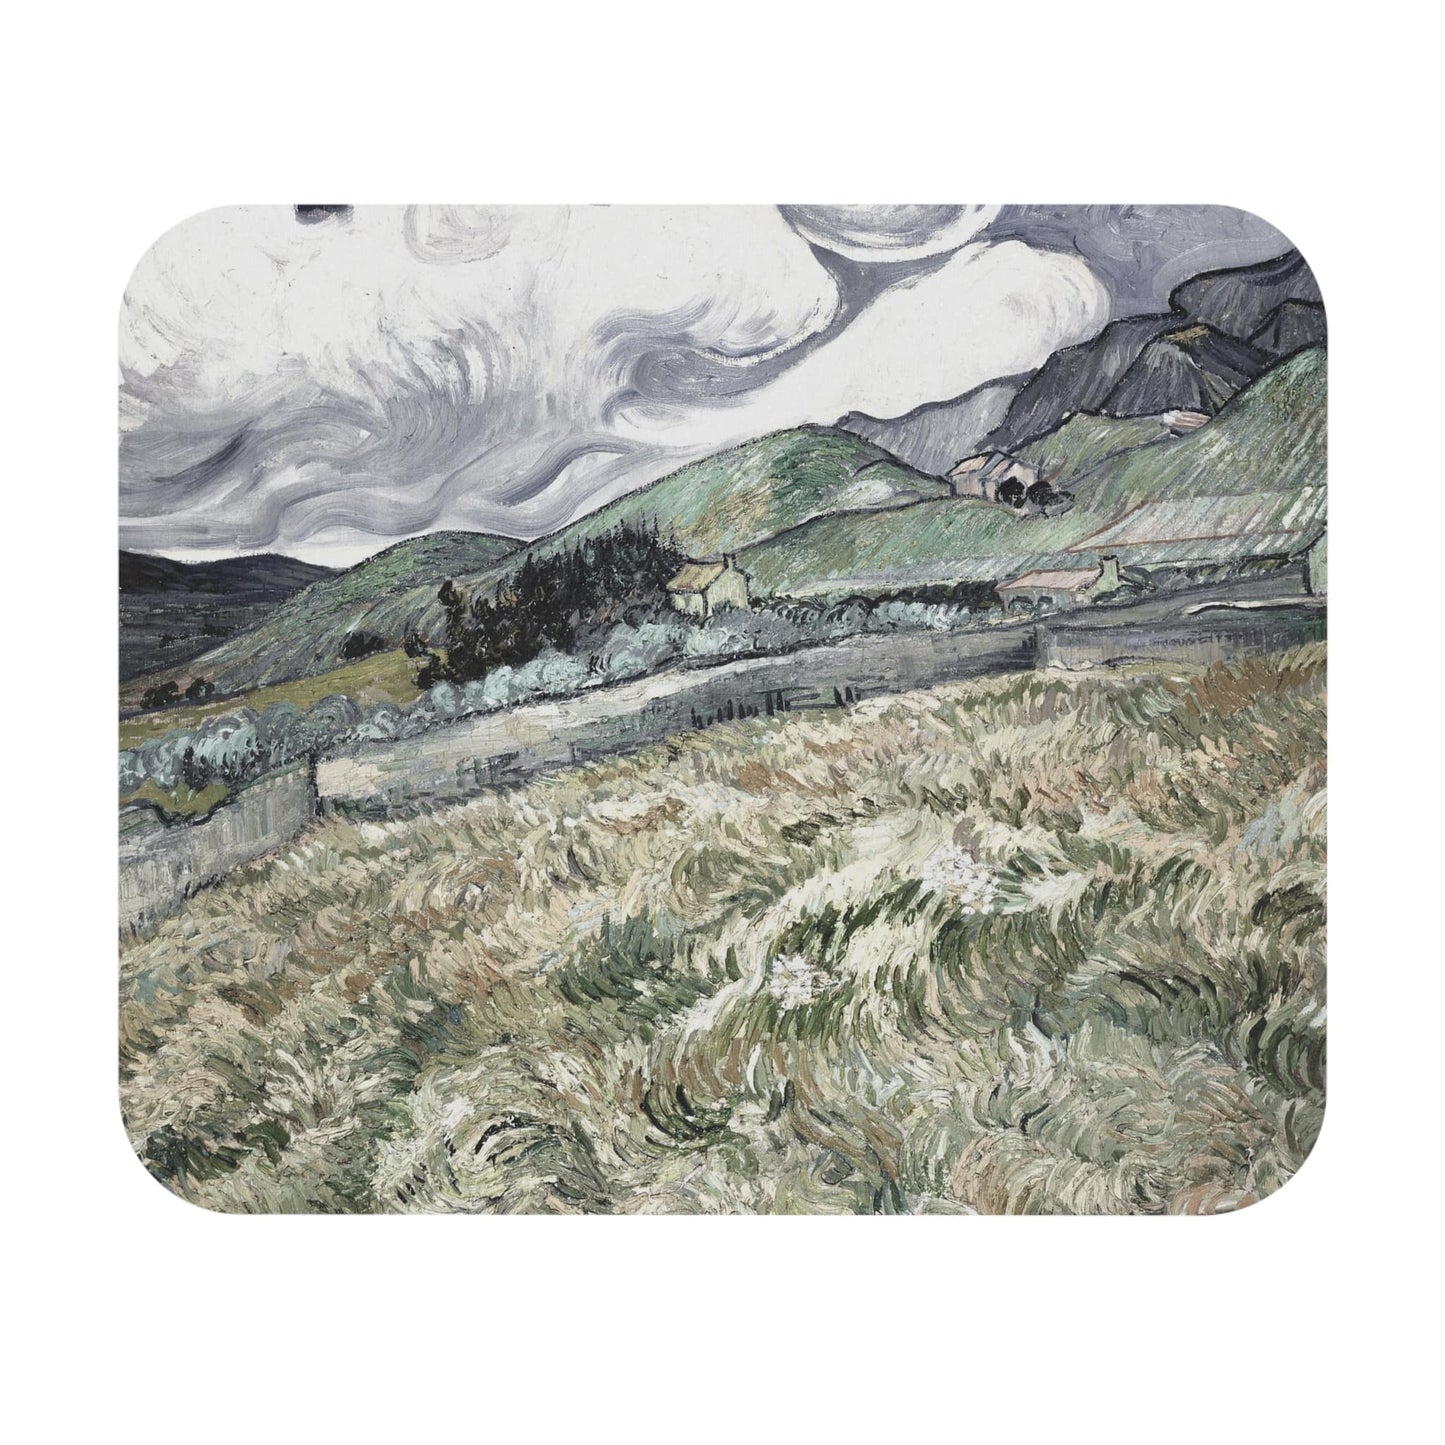 Dark Cloudy Hillside Mouse Pad featuring stormy art, perfect for desk and office decor.